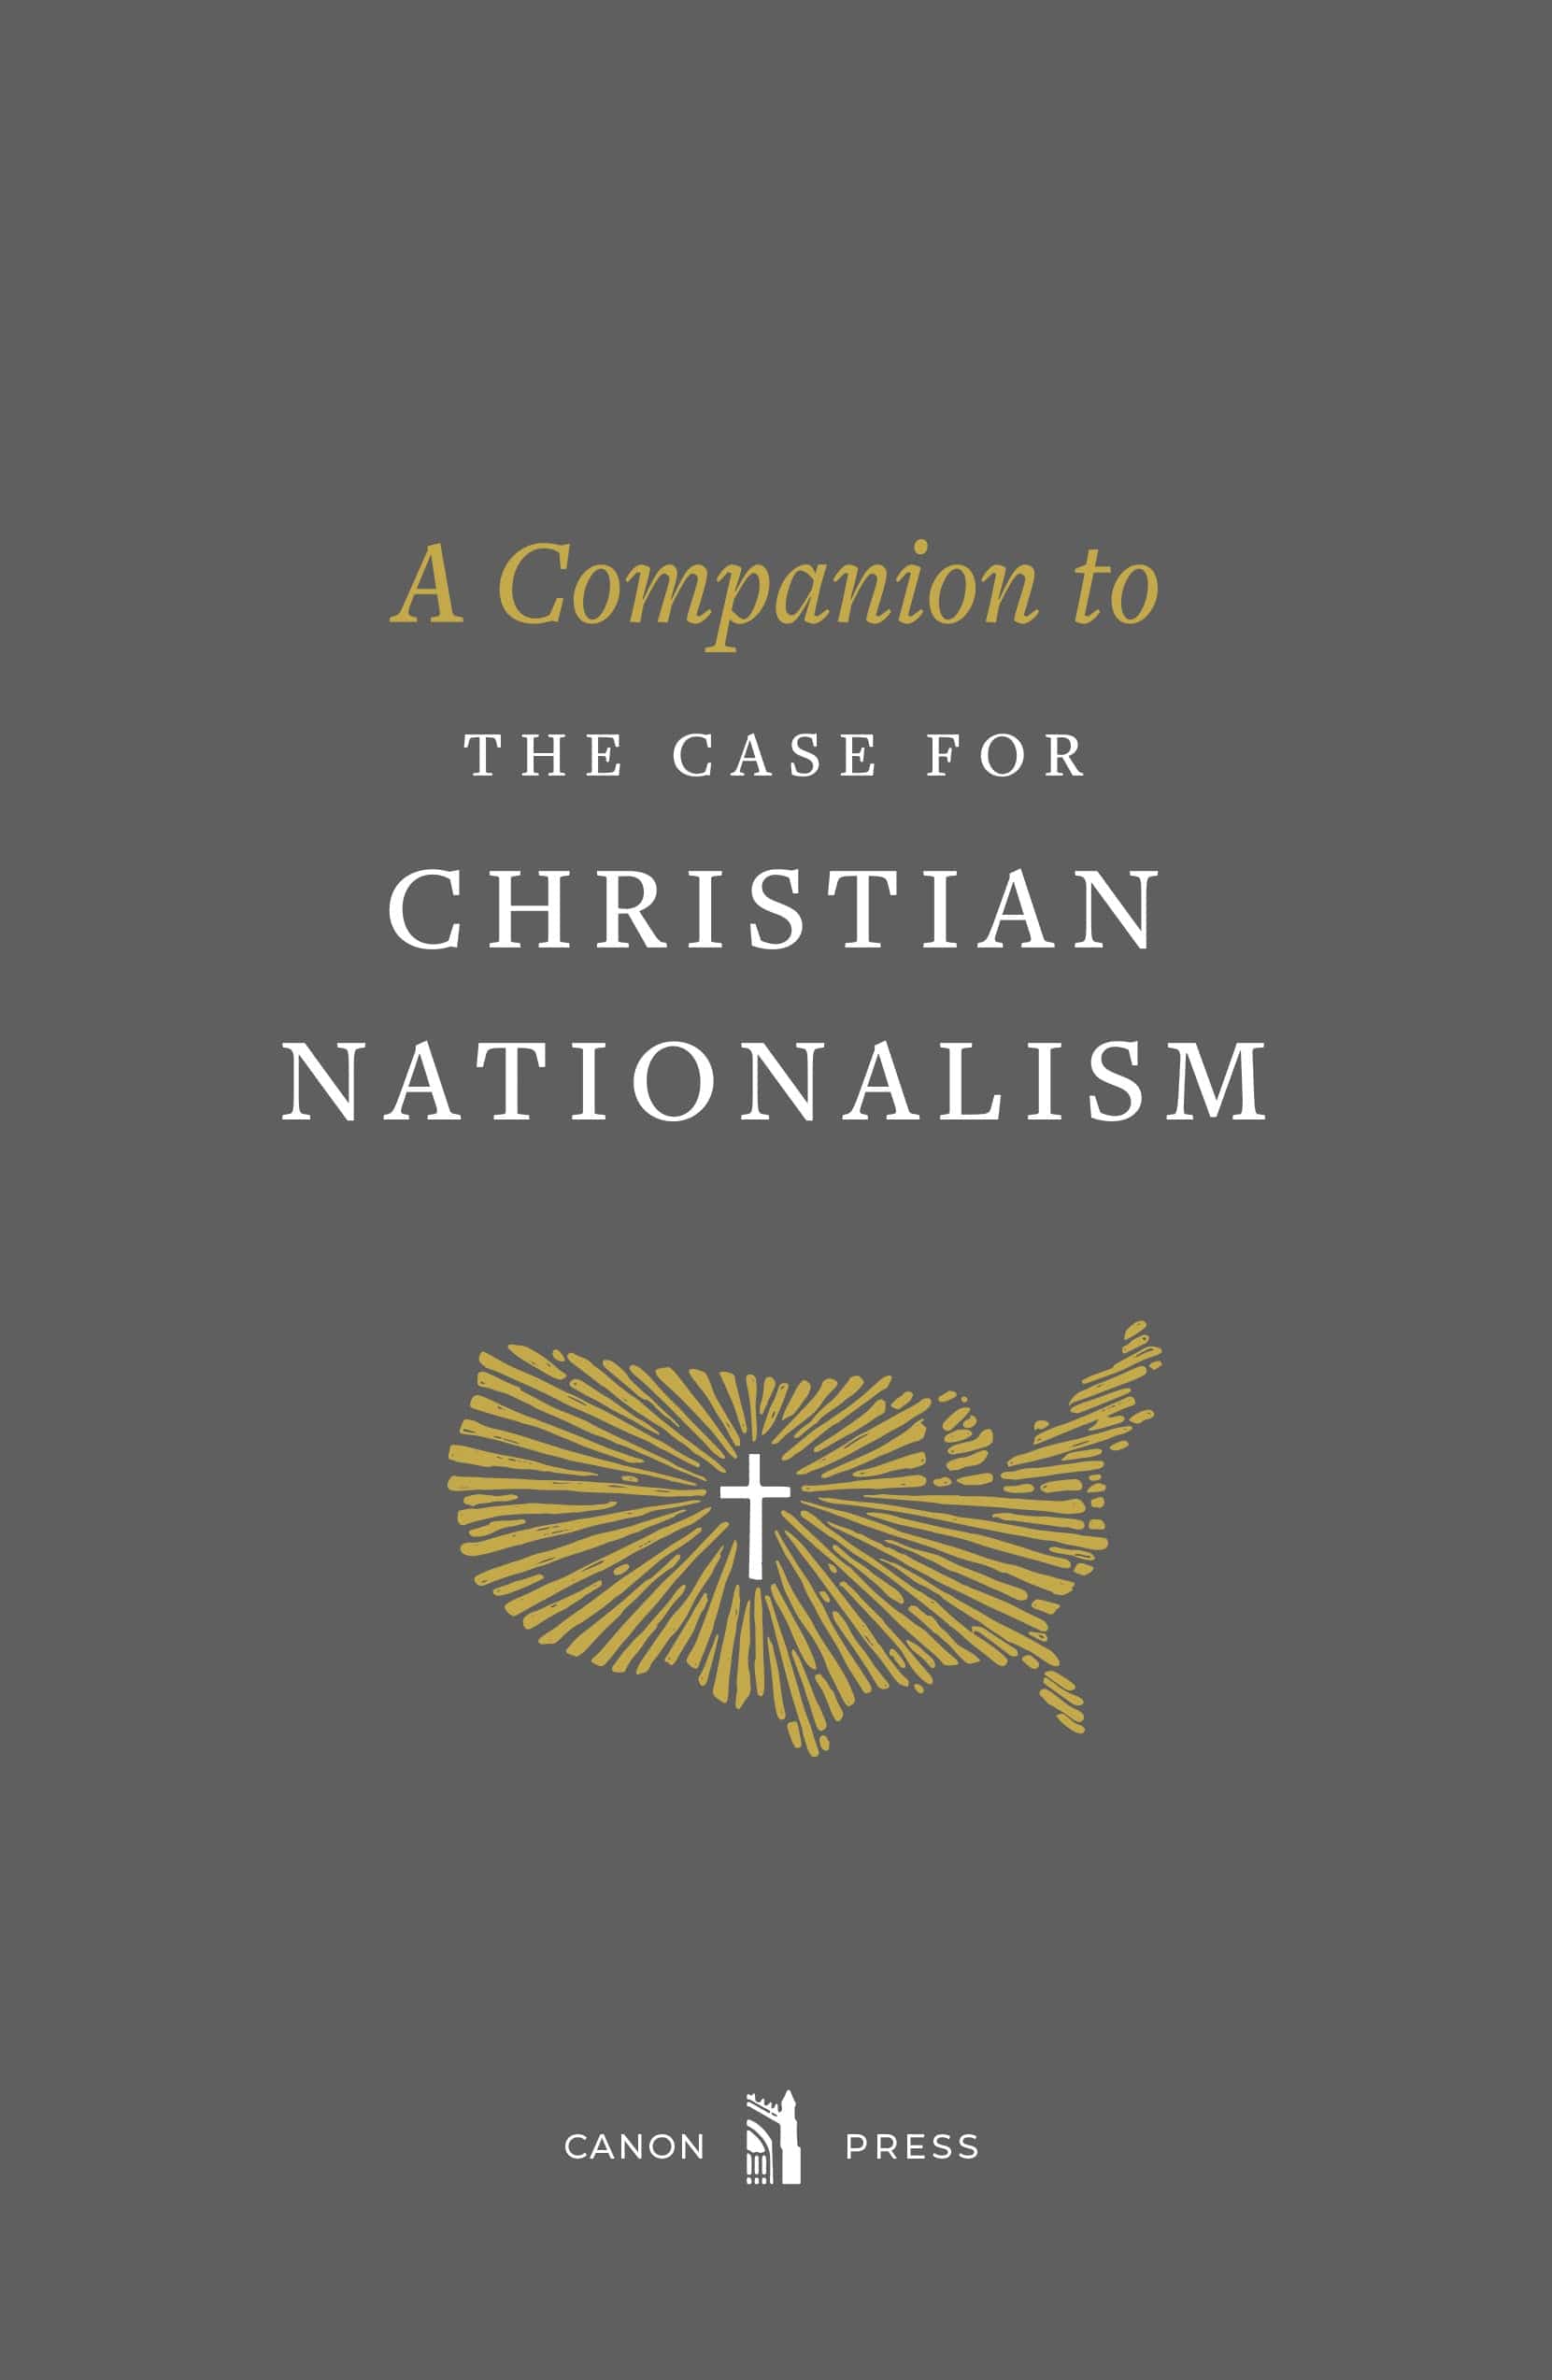 A Companion to The Case for Christian Nationalism